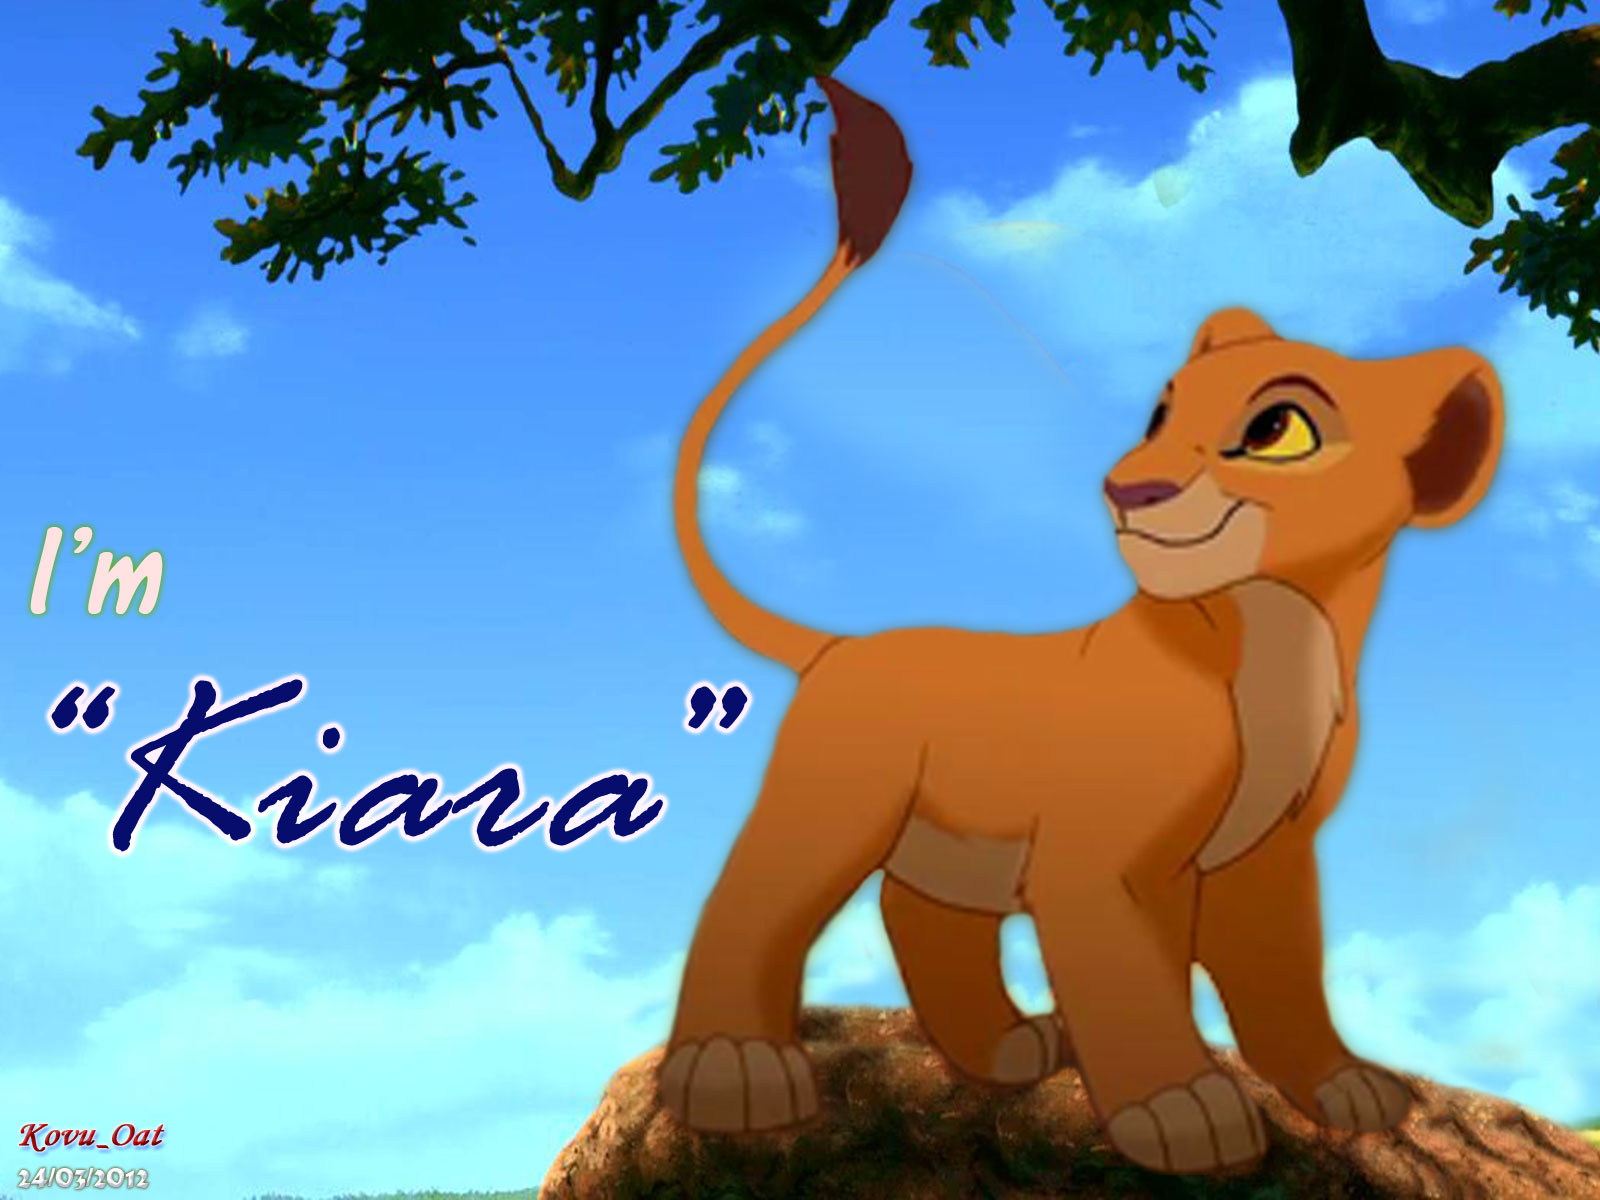 Cute Lion King Wallpapers